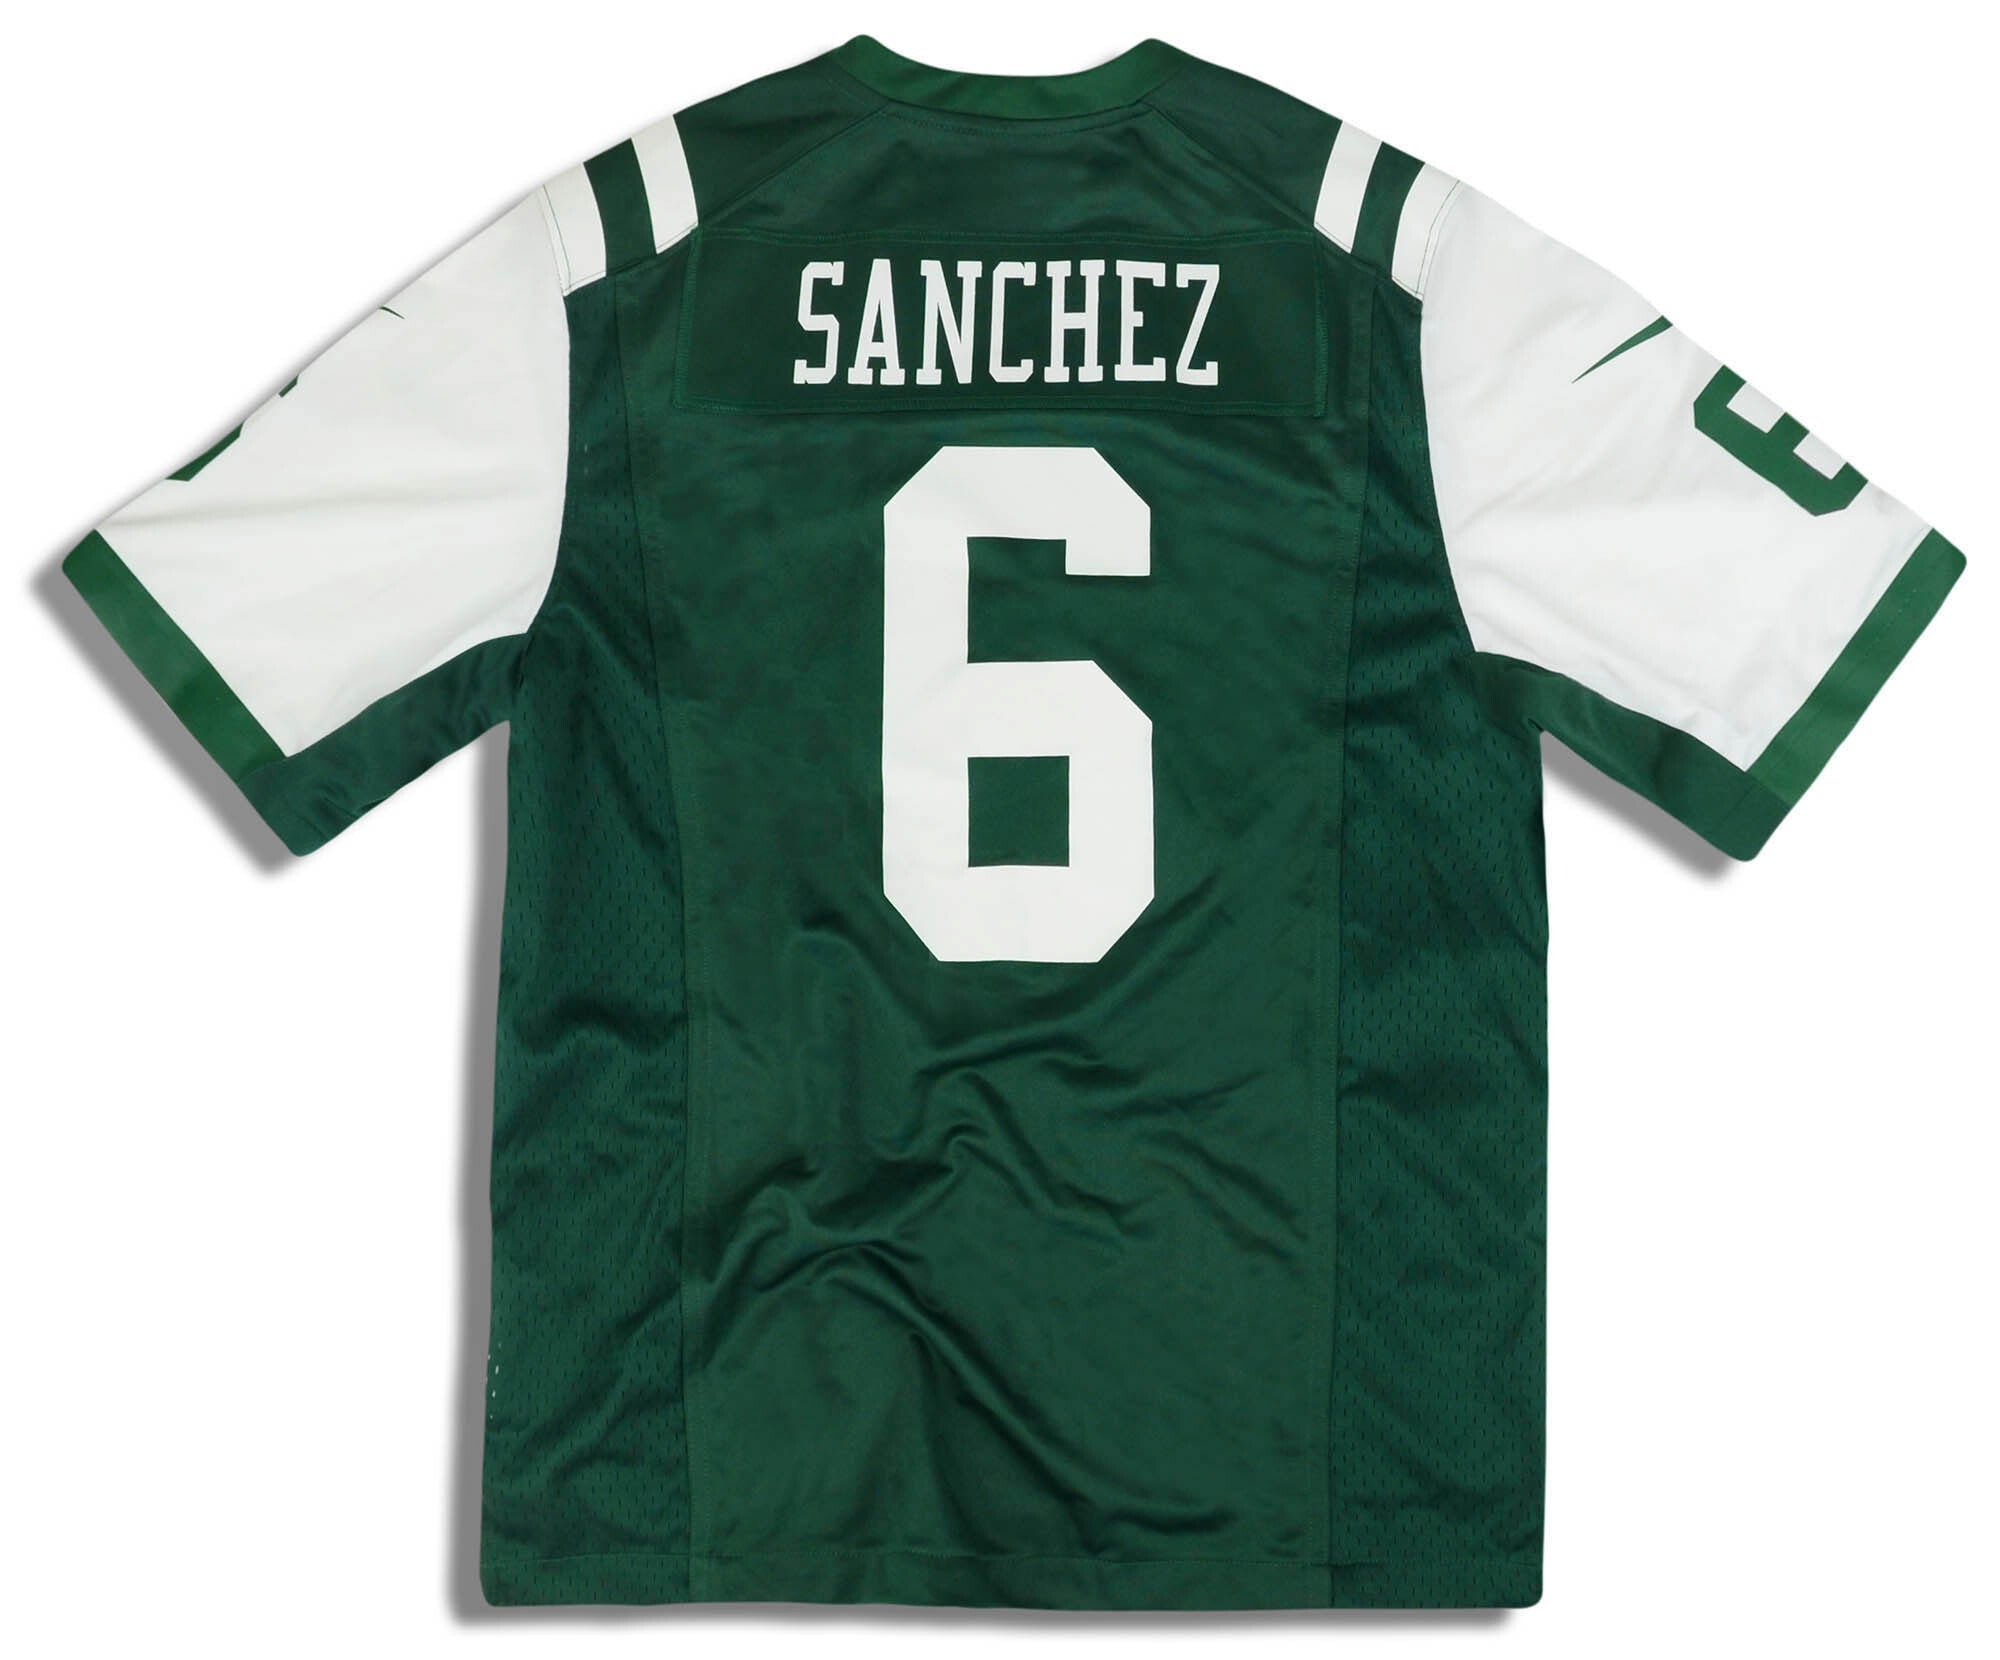 2012-13 NEW YORK JETS SANCHEZ #6 NIKE GAME JERSEY (HOME) S